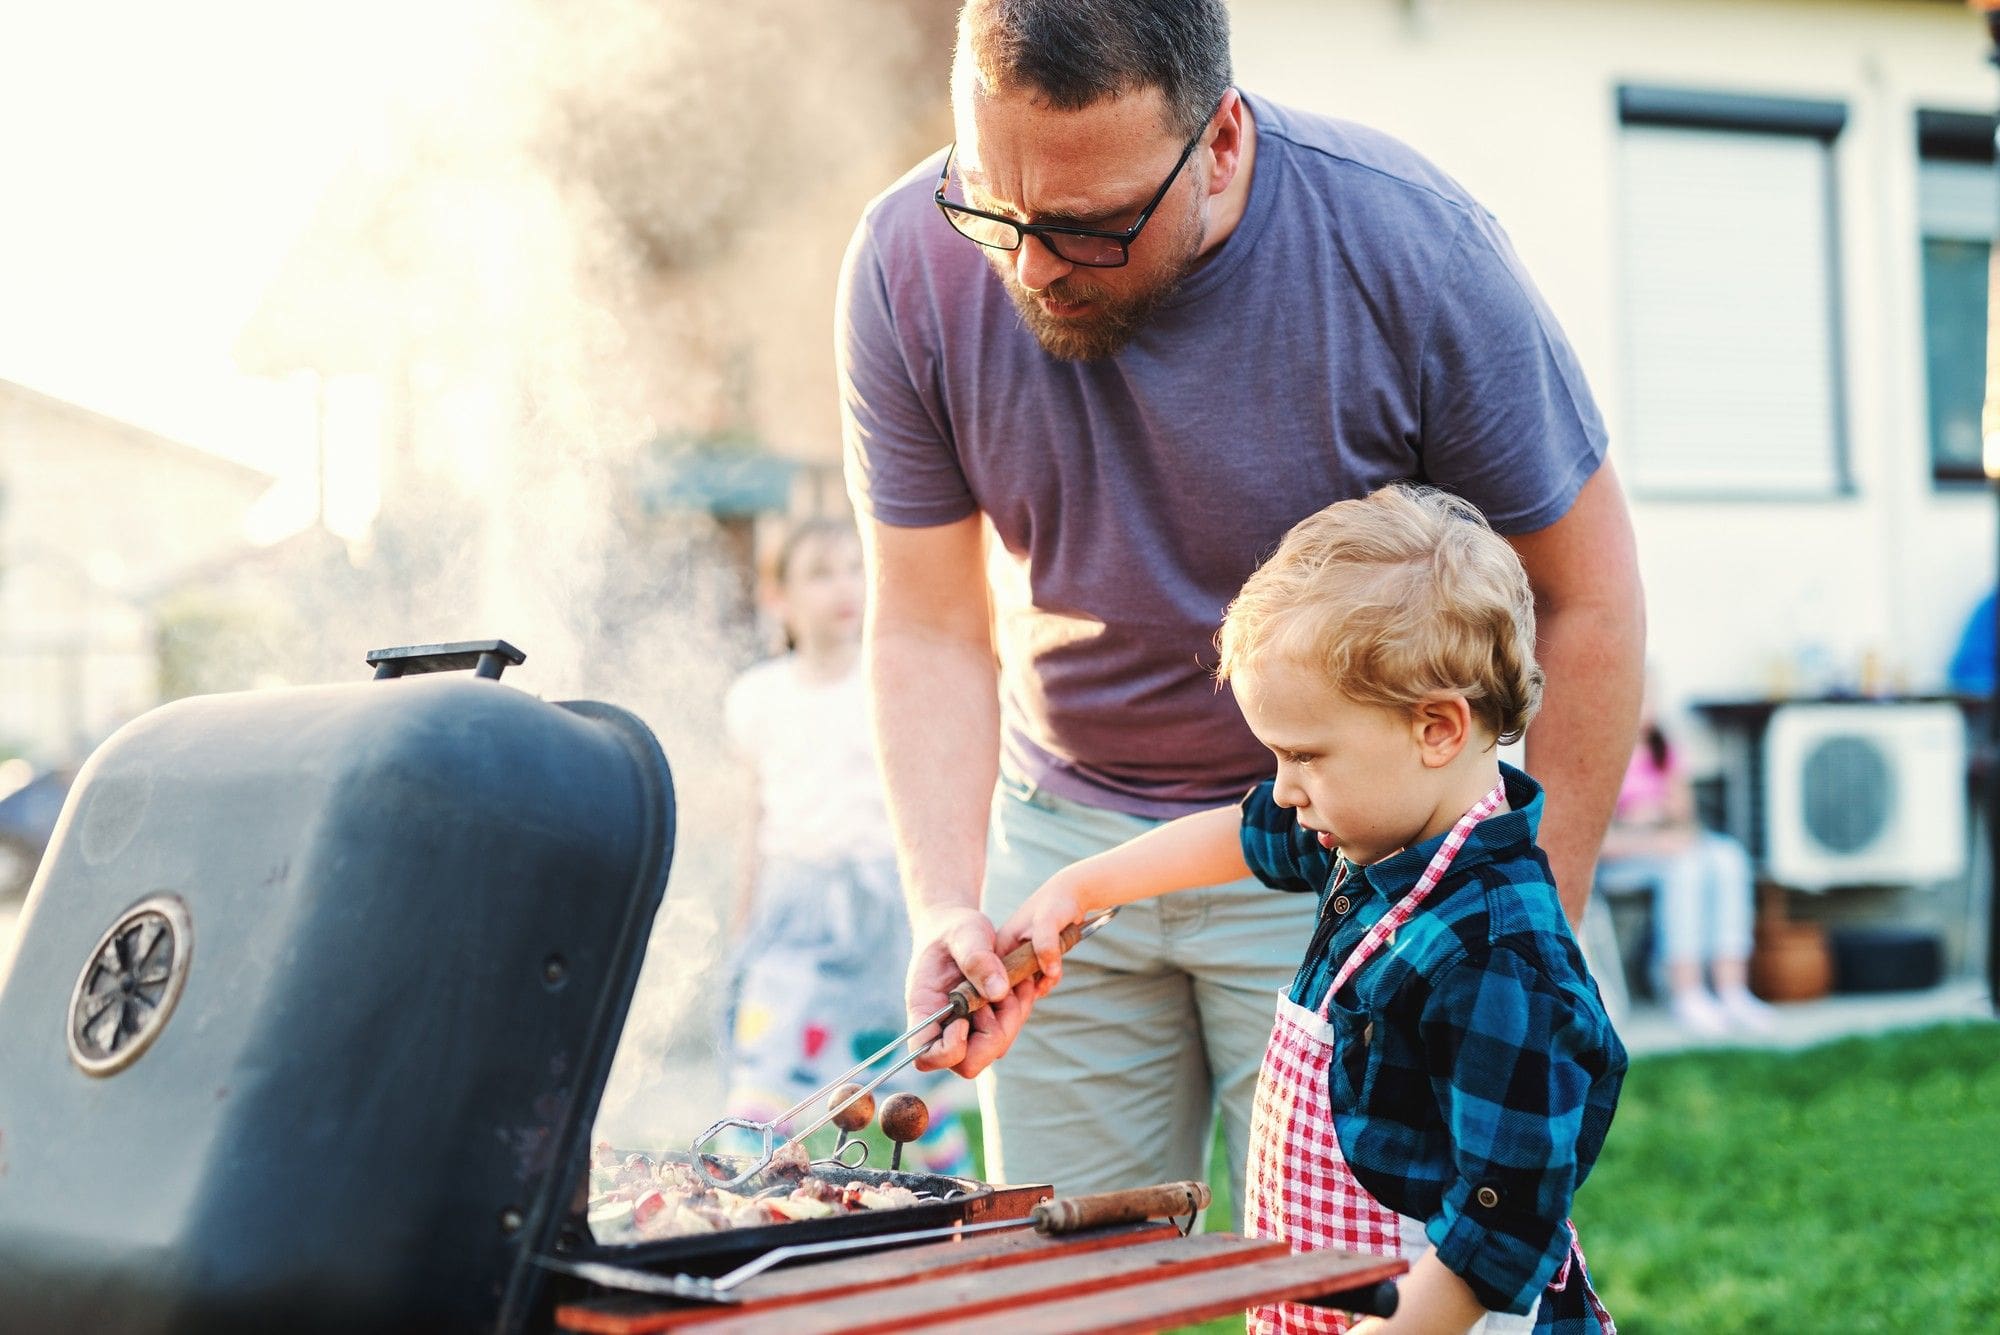 BBQ like a champ with these easy hacks